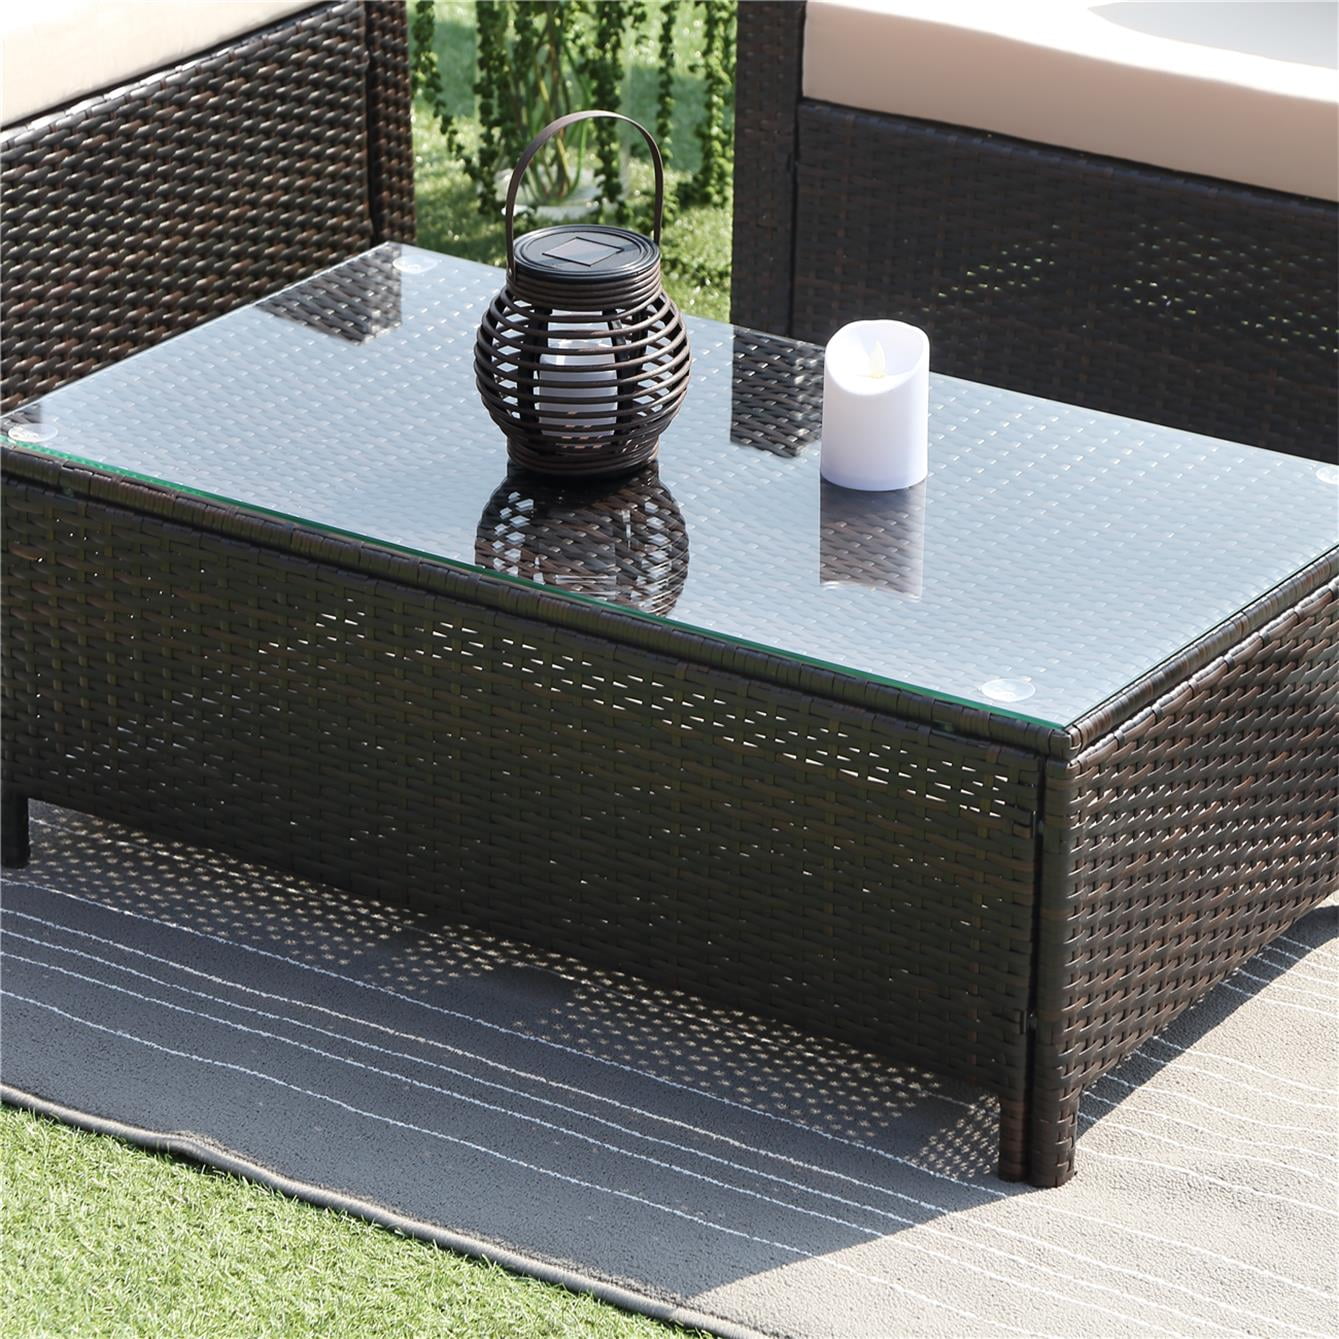 Wisteria Lane Outdoor Dining Table Brown Wicker Patio Rattan Rectangle Tempered Glass Top Table 